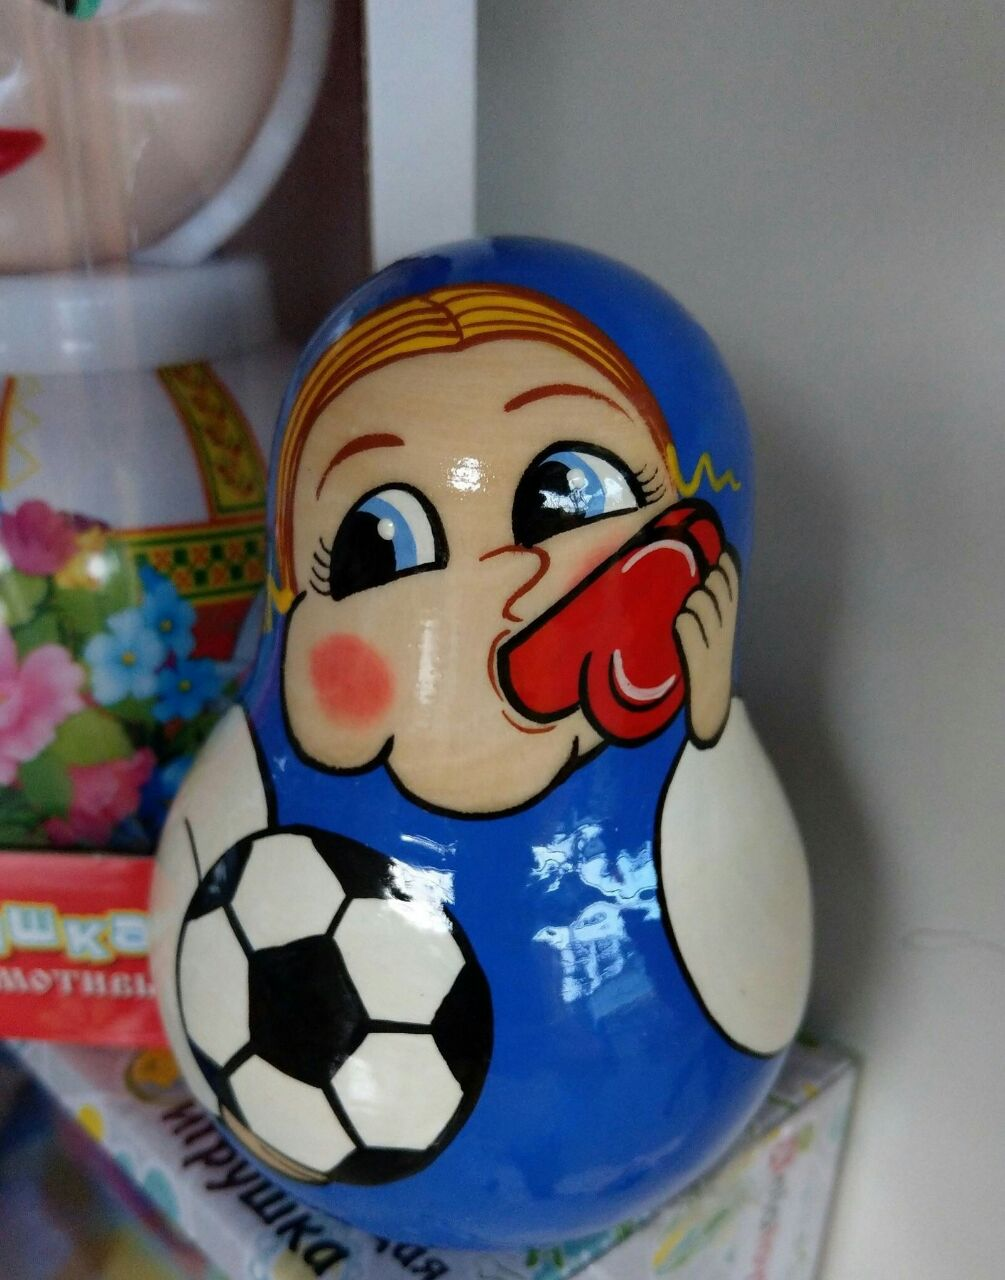 No, well, just the whistle! - Humor, Russia, Football, Matryoshka, Whistle, It seemed, Toys, Repeat